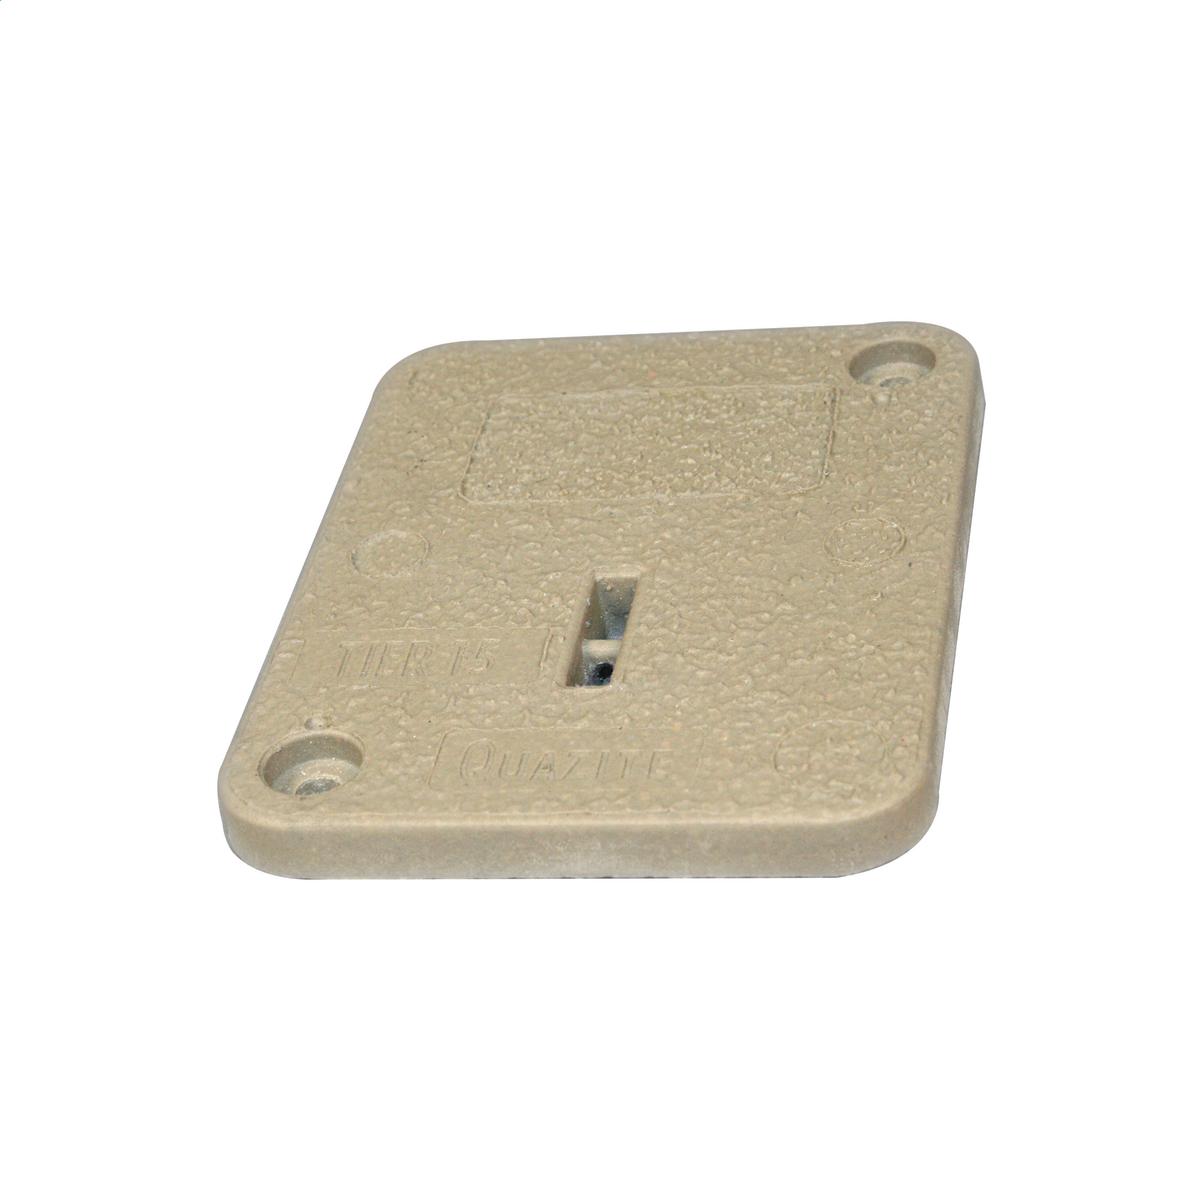 Hubbell PG3636CA0012 Cover, polymer concrete, Tier 8, 36x36, 1 piece, 2 Bolts, Communications logo 